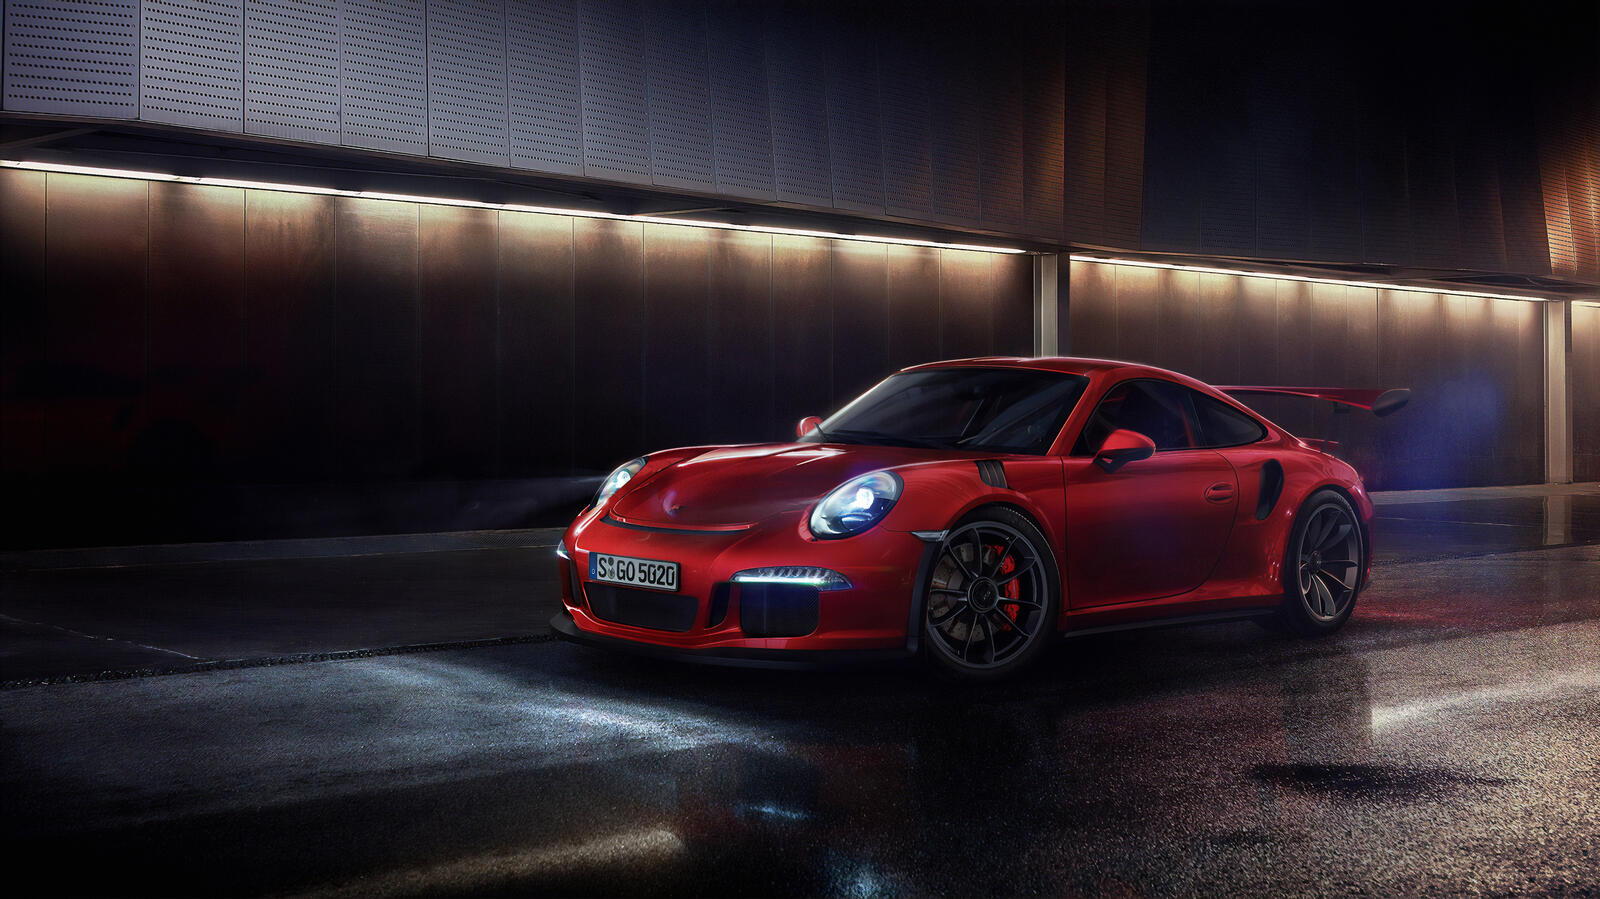 Free photo Cherry Porsche GT3 on the streets of the night